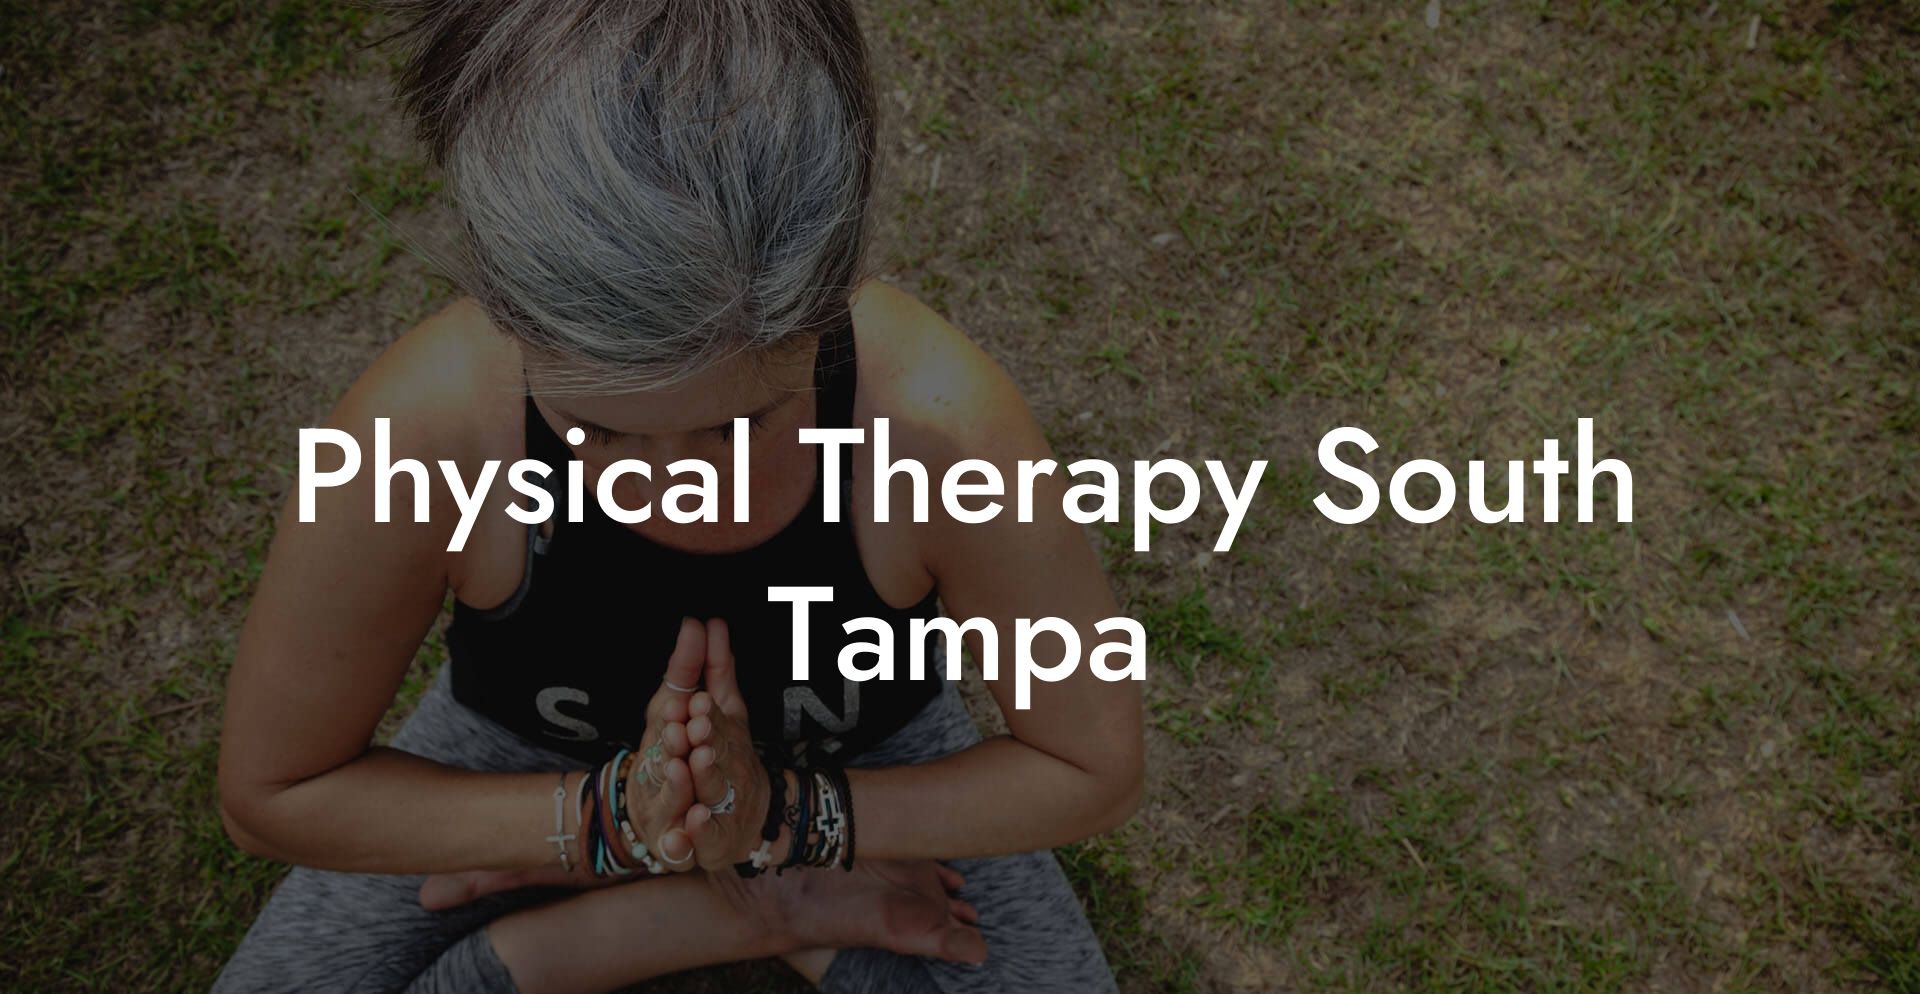 Physical Therapy South Tampa